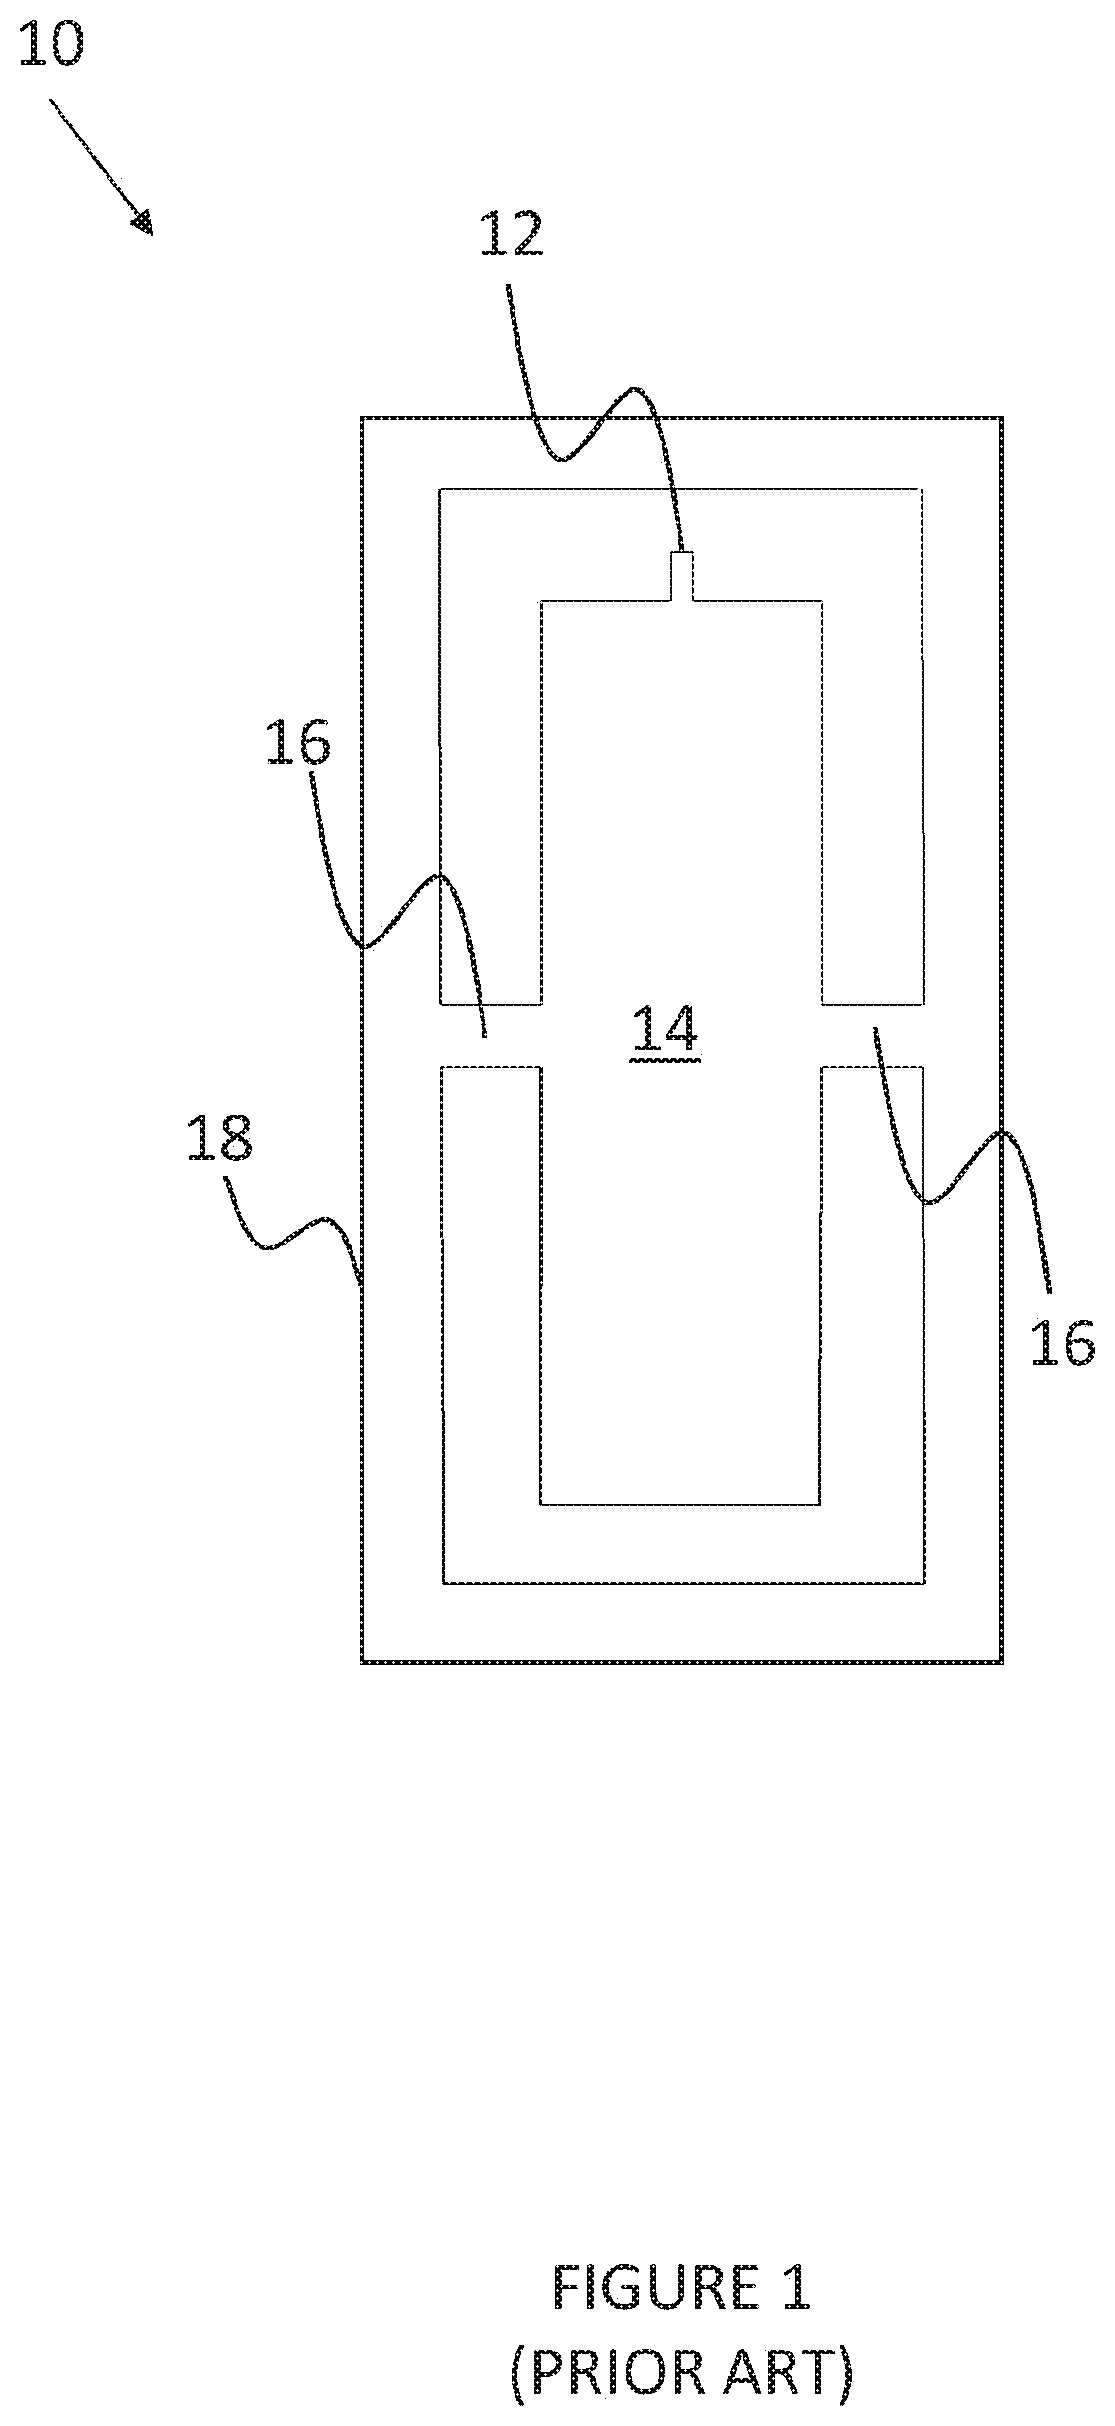 Passive semiconductor device assembly technology